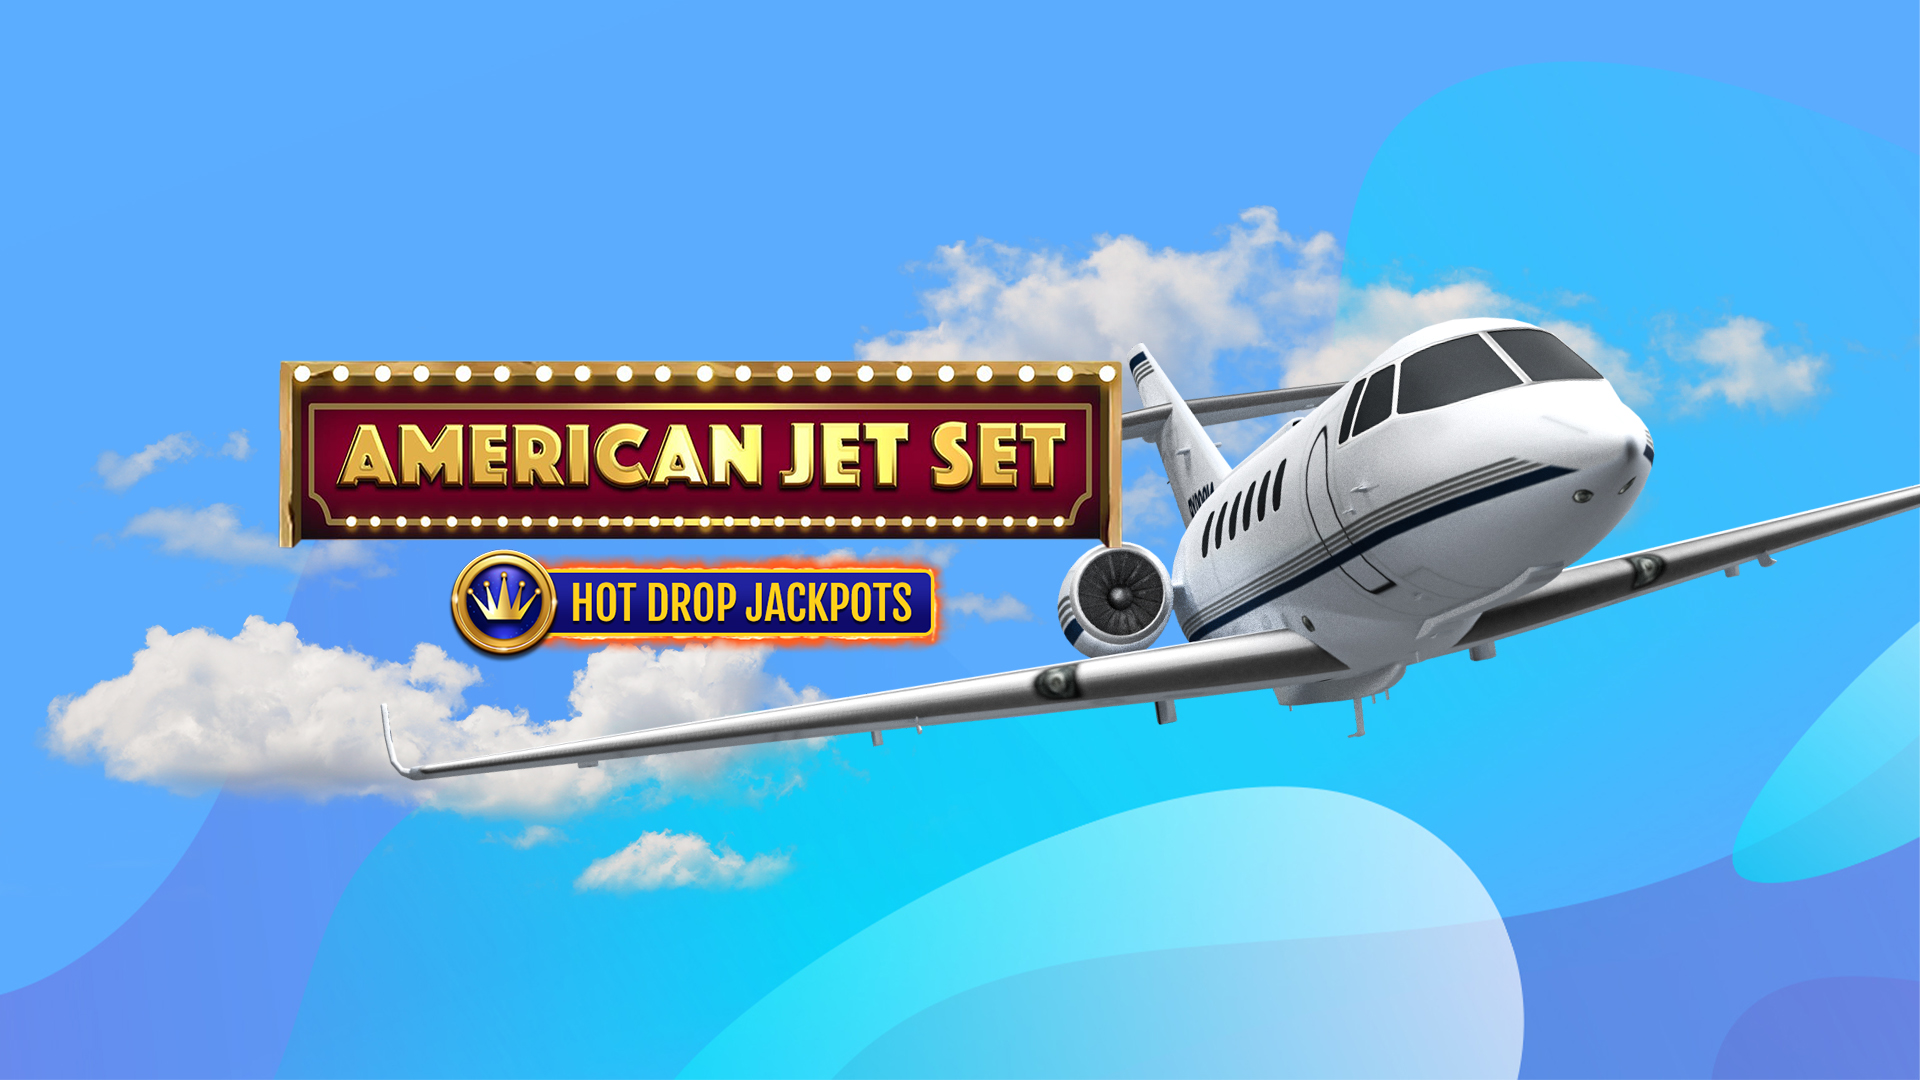 A 3D-animated small jet airplane is pictured flying in front of clouds against a blue background, while the logo from SlotsLV’s slot game called American Jet Set hangs overhead, with a smaller logo below featuring a golden crown, and the words “Hot Drop Jackpots”.